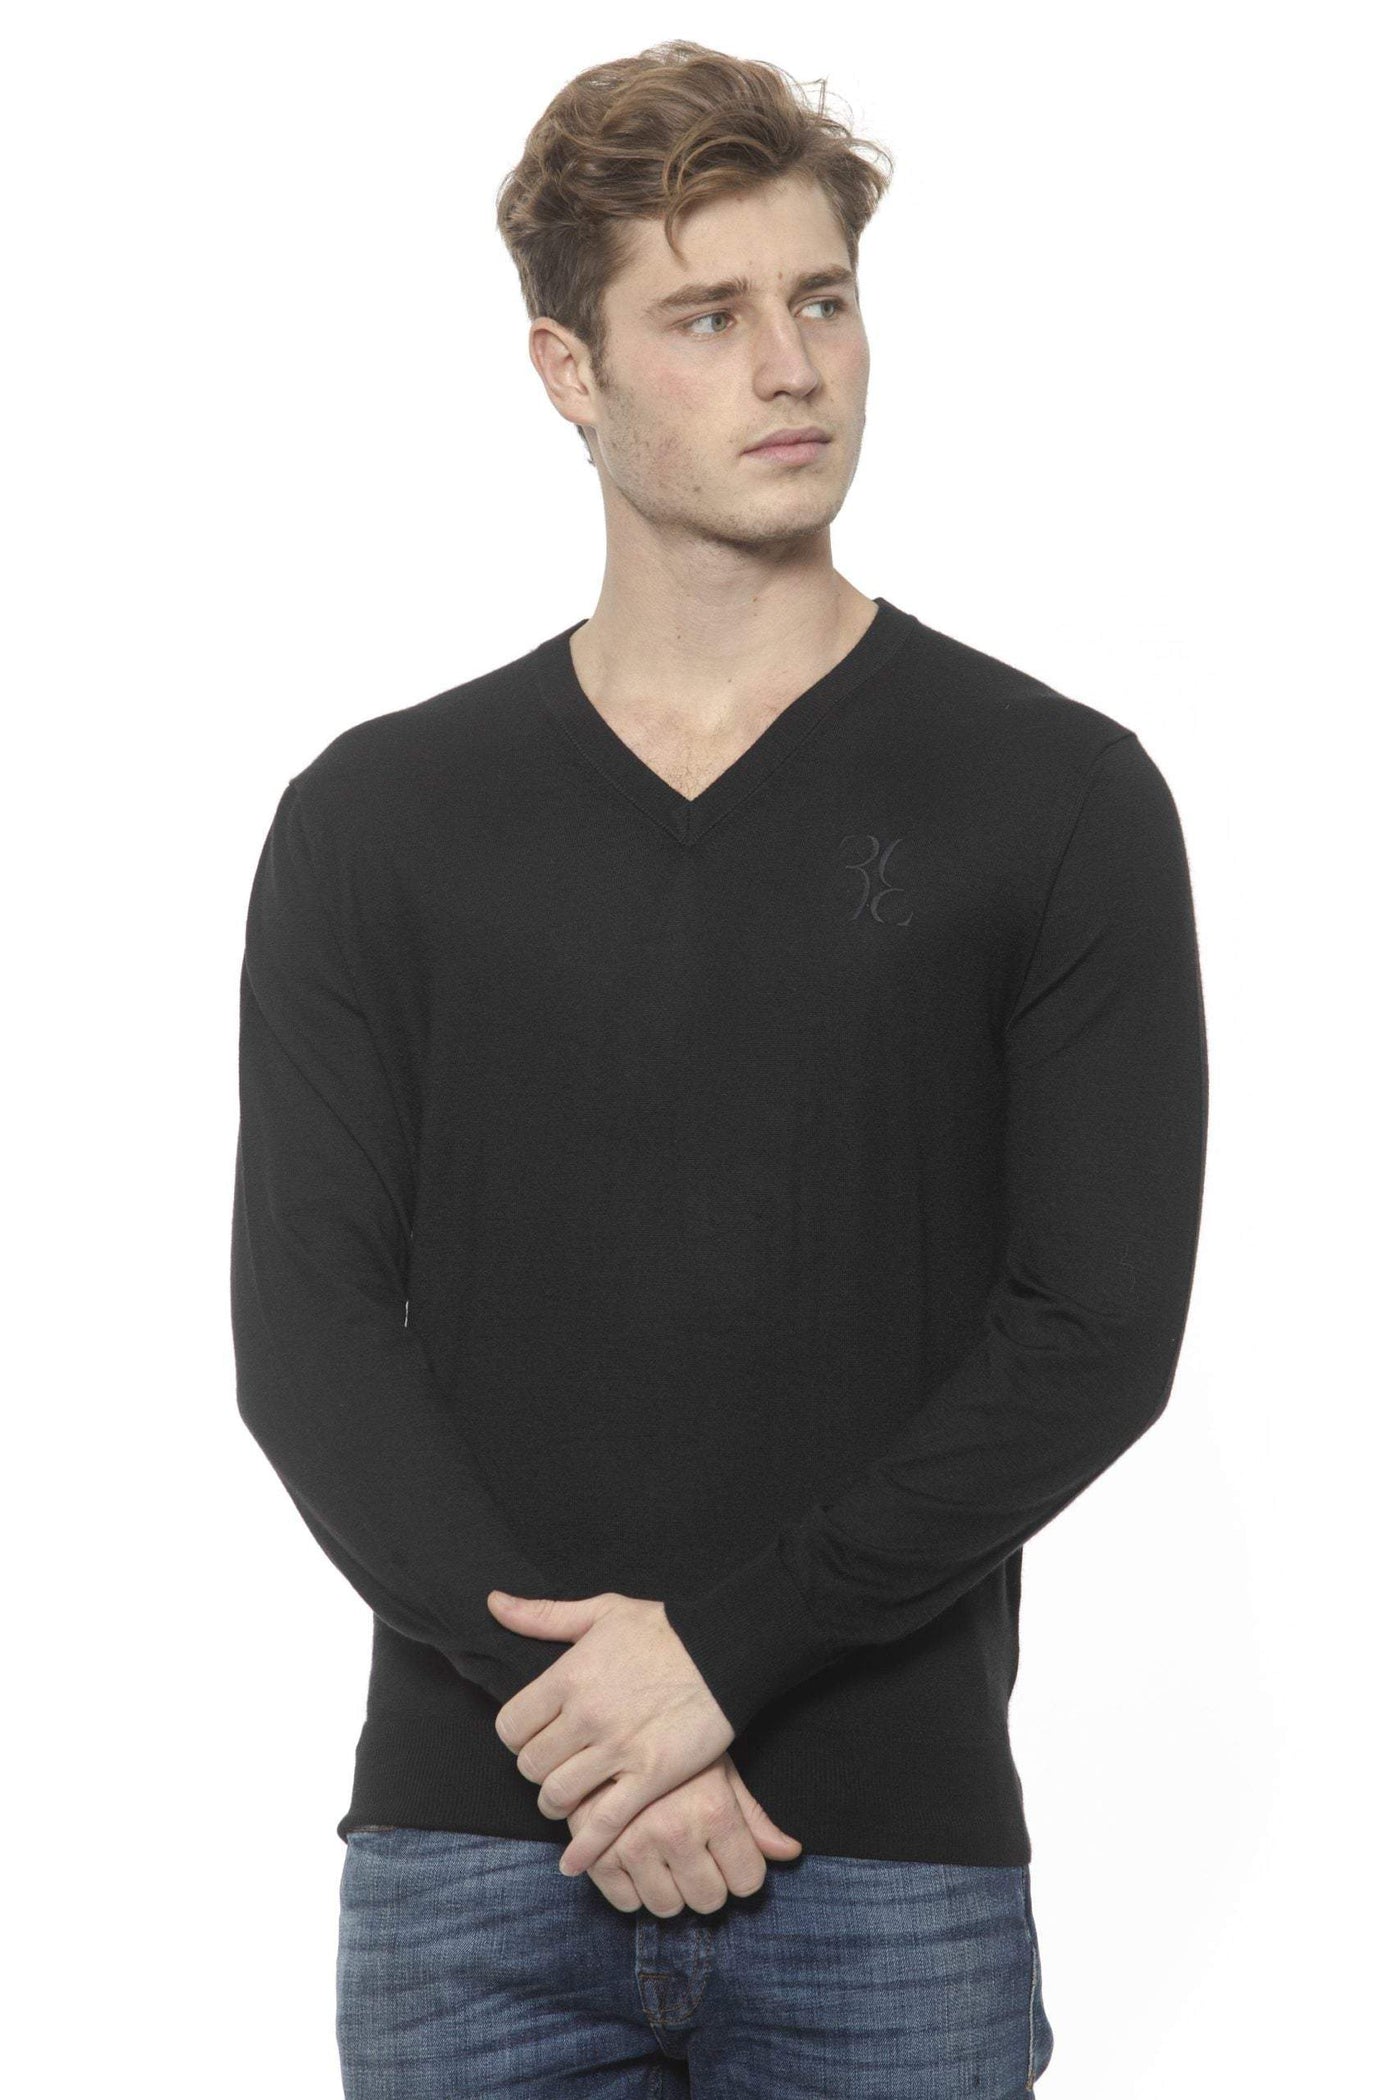 Billionaire Italian Couture v-neck emboidered  Sweater #men, 3XL, Billionaire Italian Couture, Black, feed-agegroup-adult, feed-color-Black, feed-gender-male, L, M, S, Sweaters - Men - Clothing, XL, XXL at SEYMAYKA